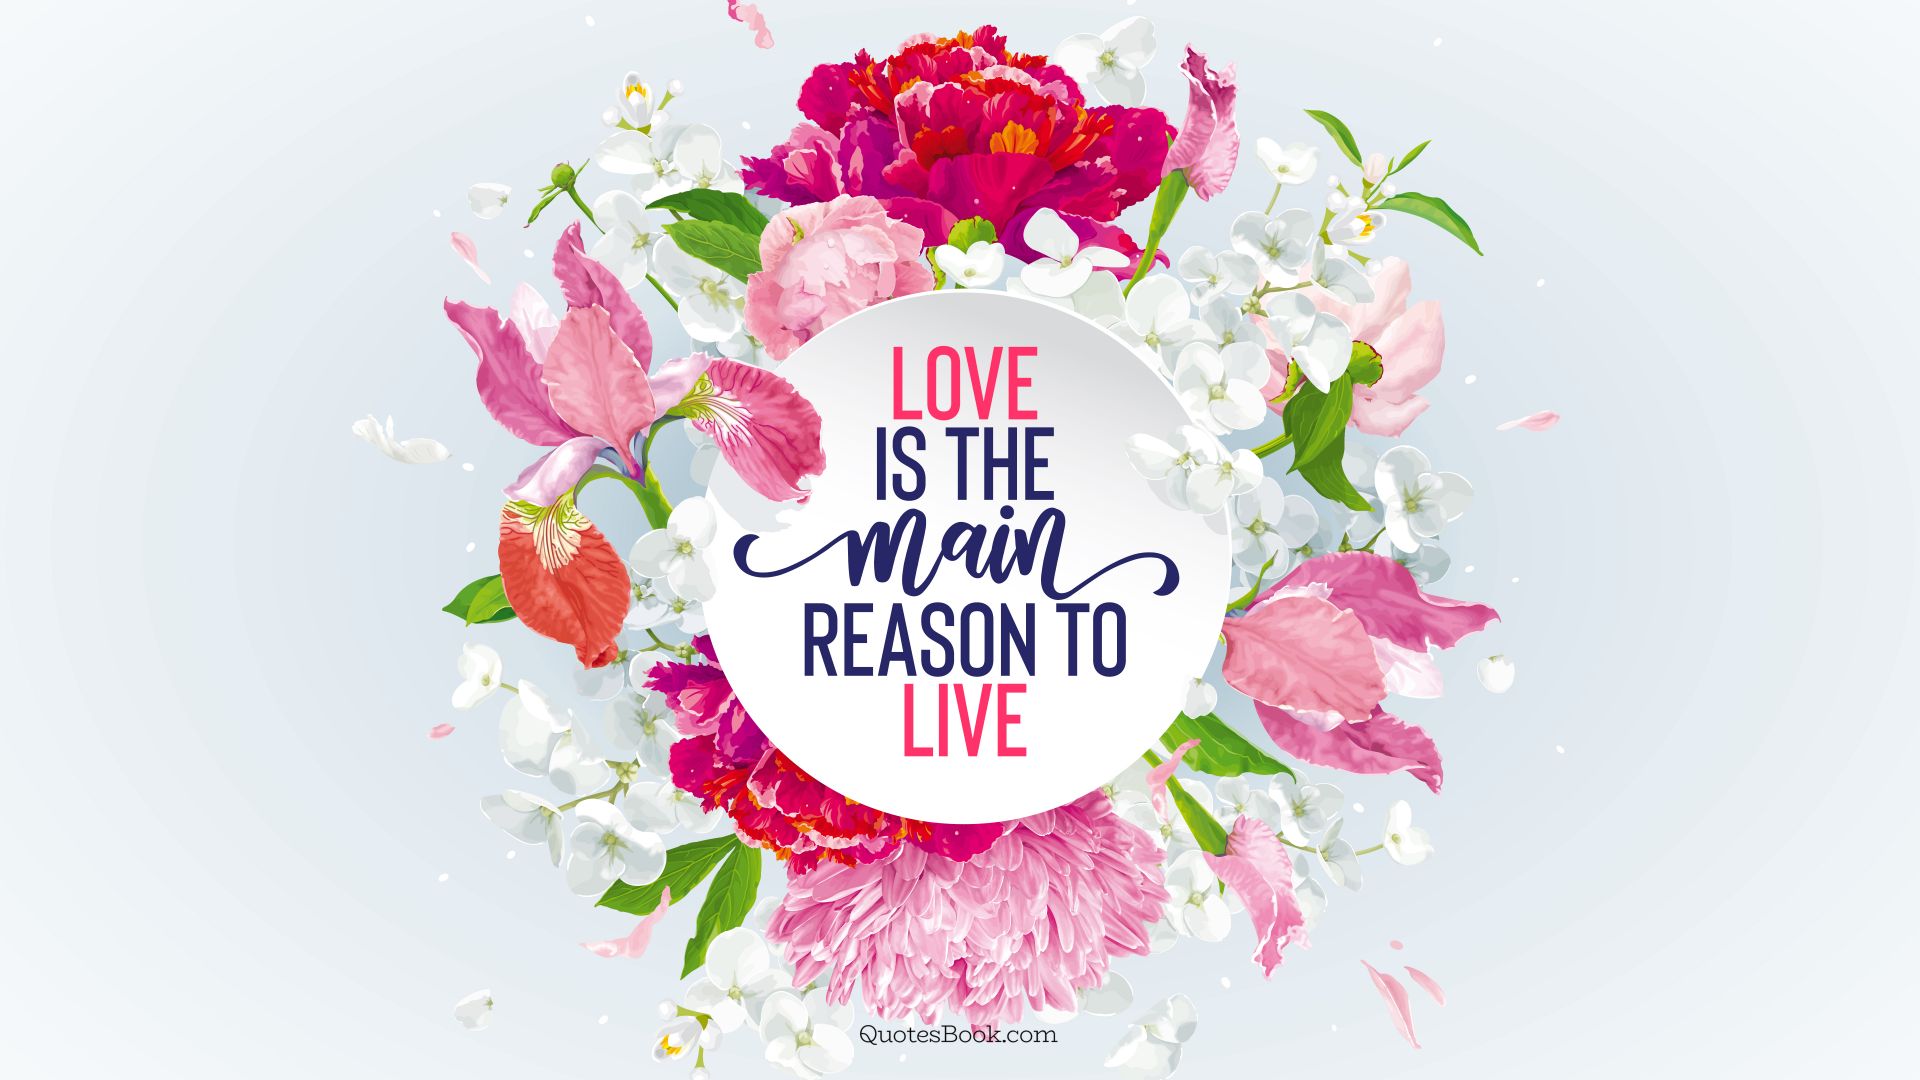 Love is the main reason to live